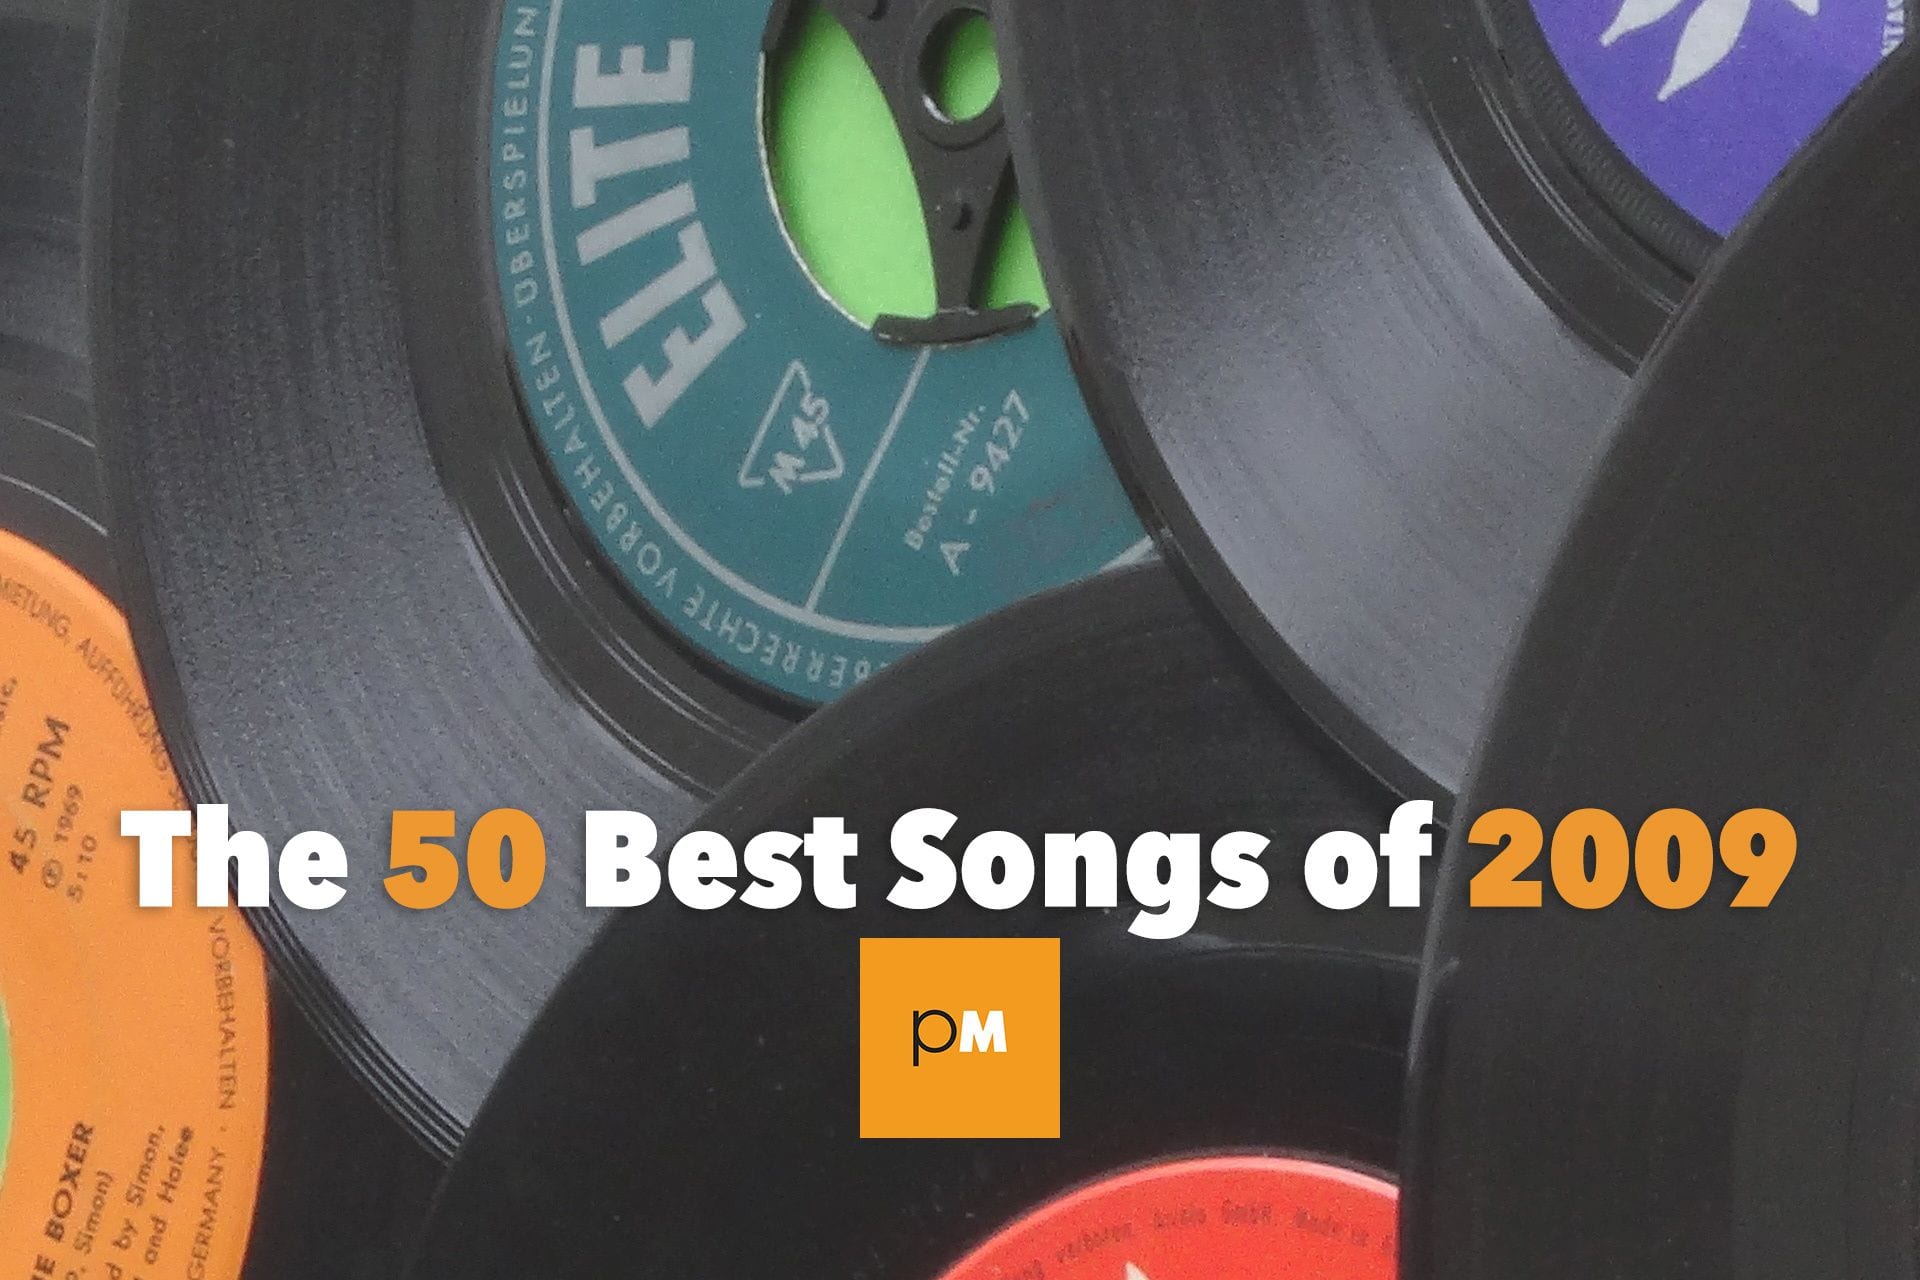 The 50 Best Songs of 2009